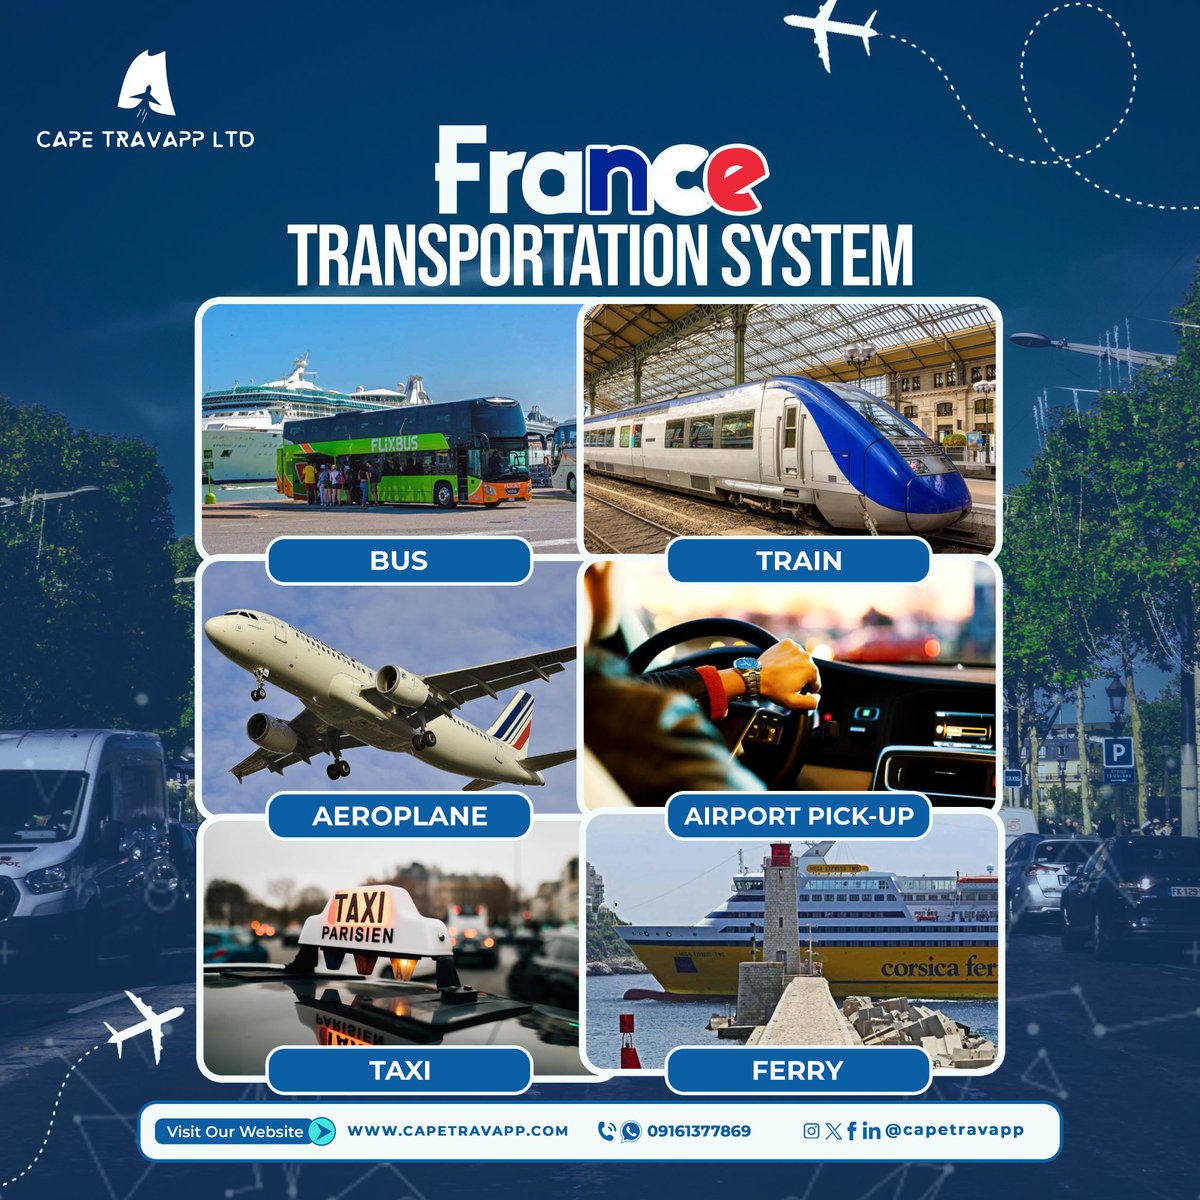 Efficient, interconnected, and steeped in history - France's transportation system seamlessly merges modernity with a rich heritage, offering travelers a journey through time and technology.

#transportation #explorefrance #francetravels #paris #louvre #capetravels #capetravapp